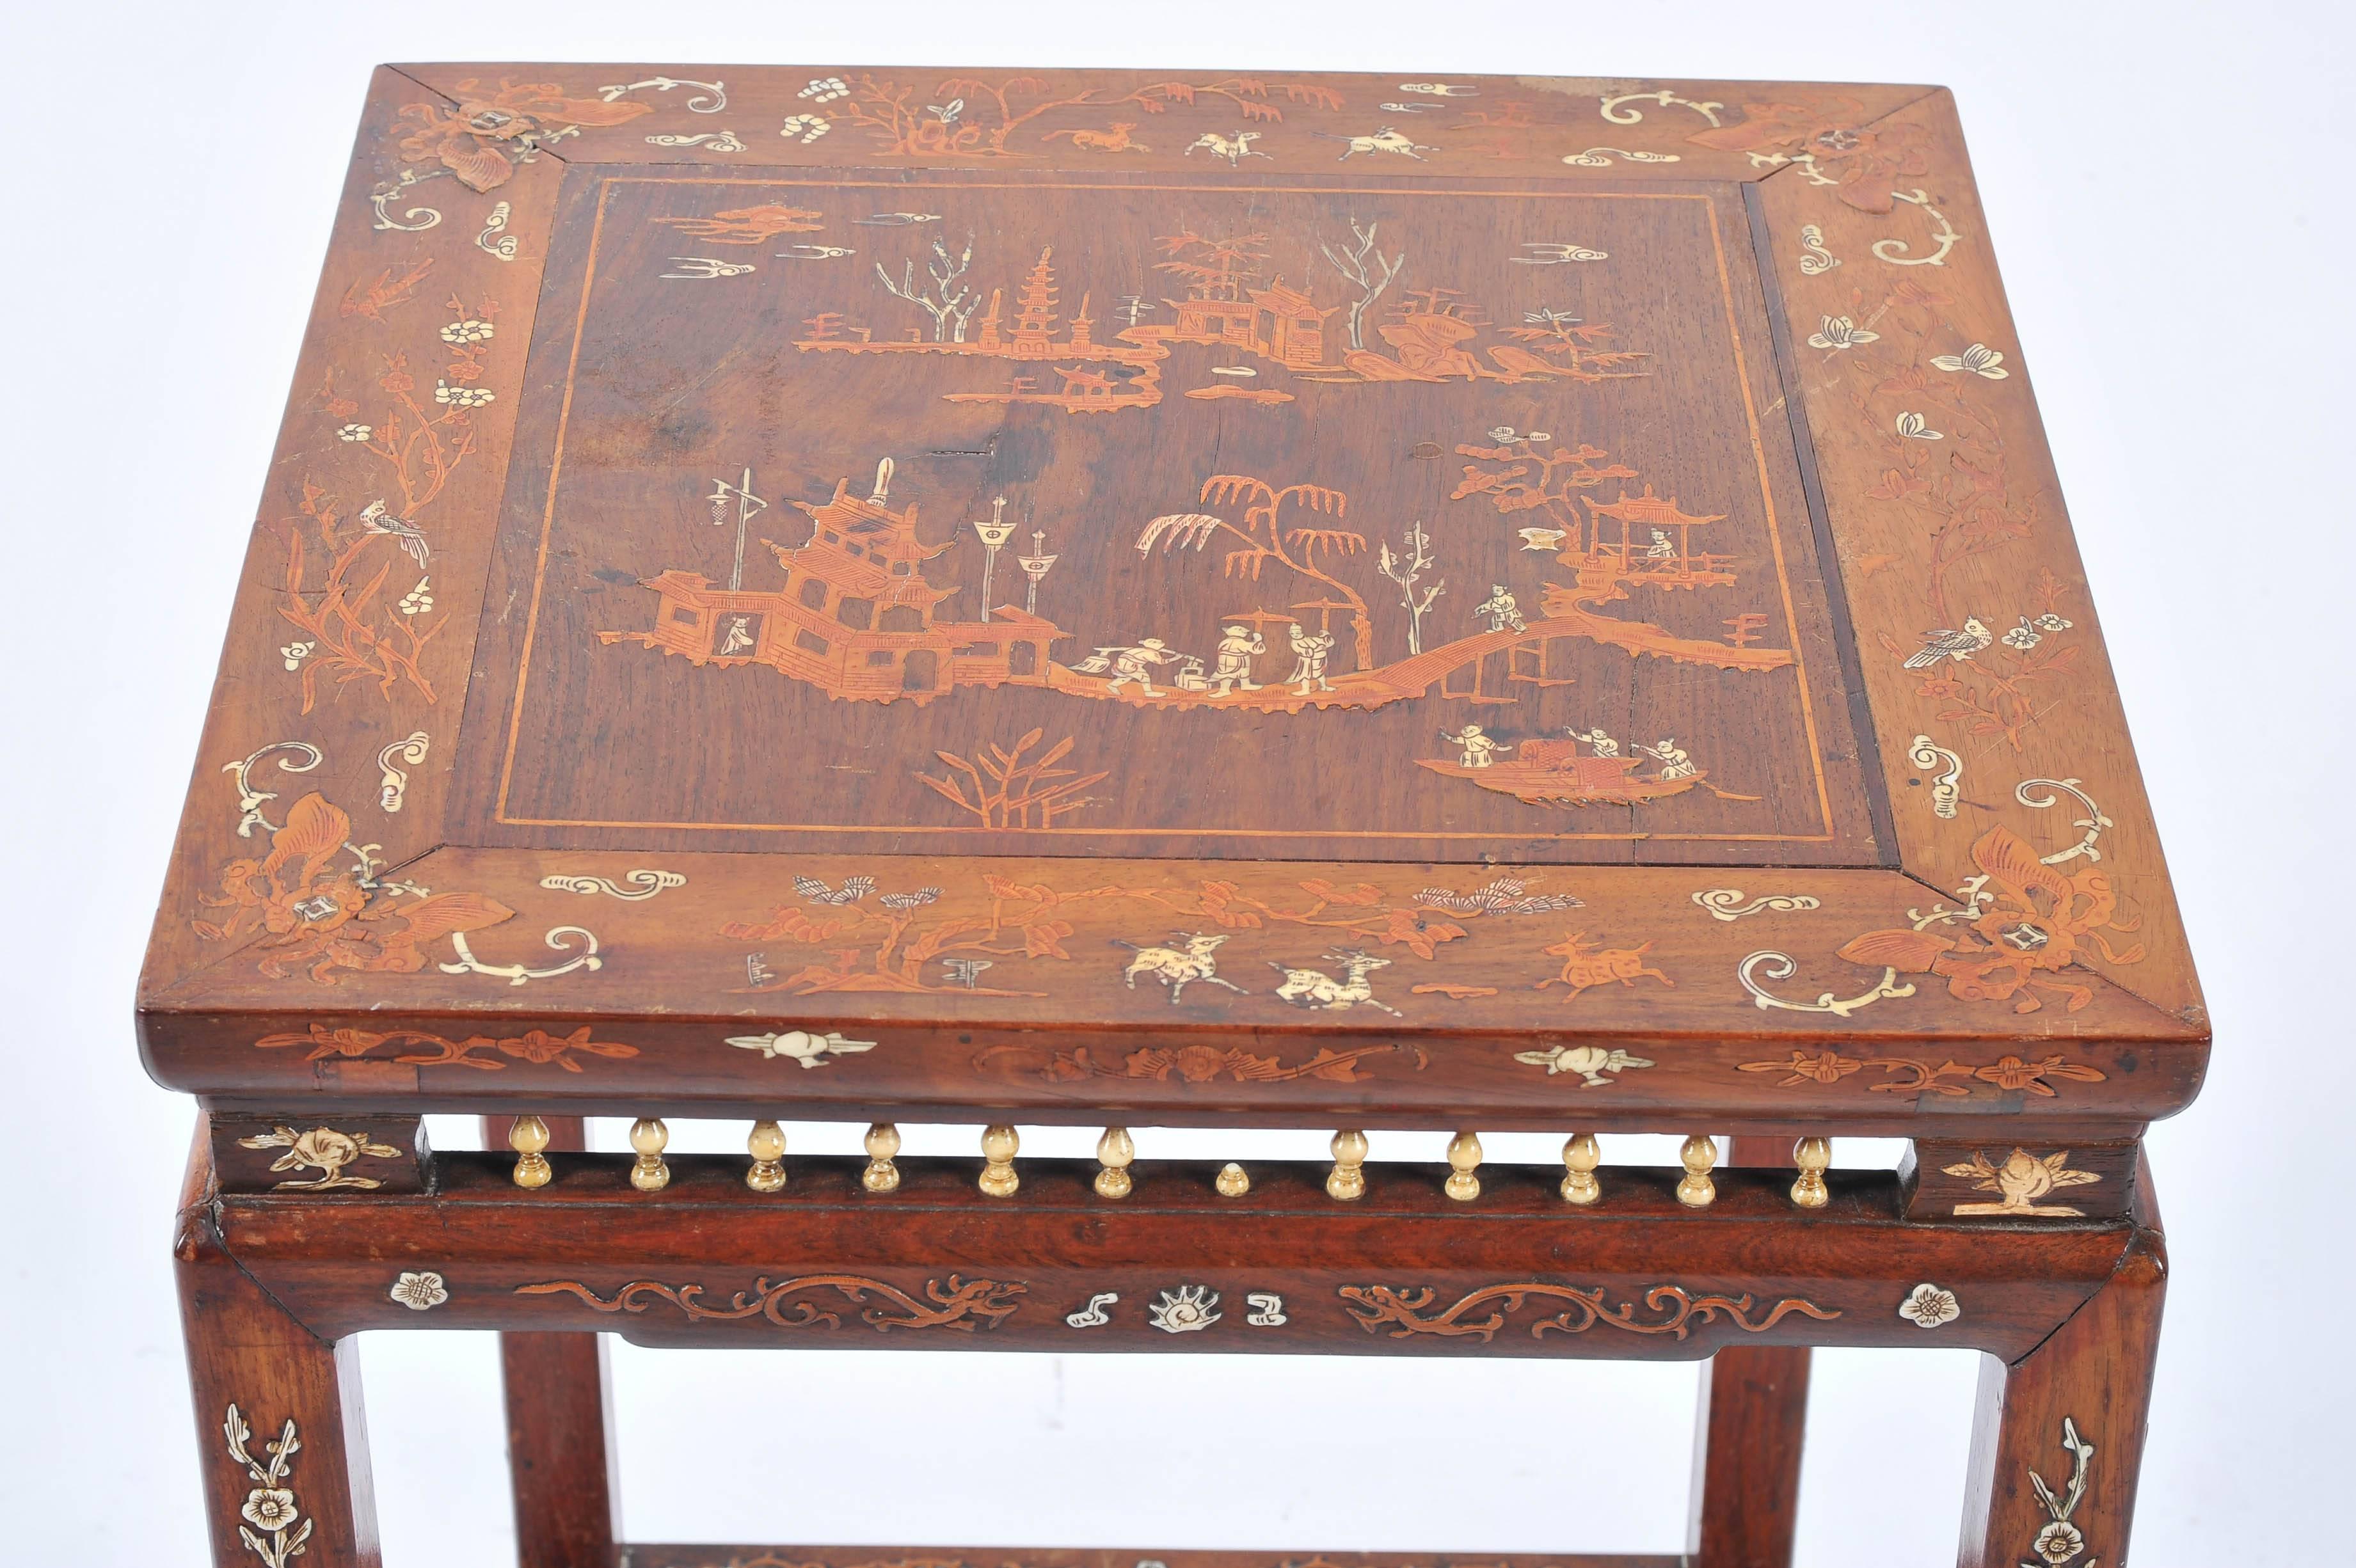 A good quality 19th century Chinese hardwood inlaid side table, depicting classical oriental scenes and motifs.